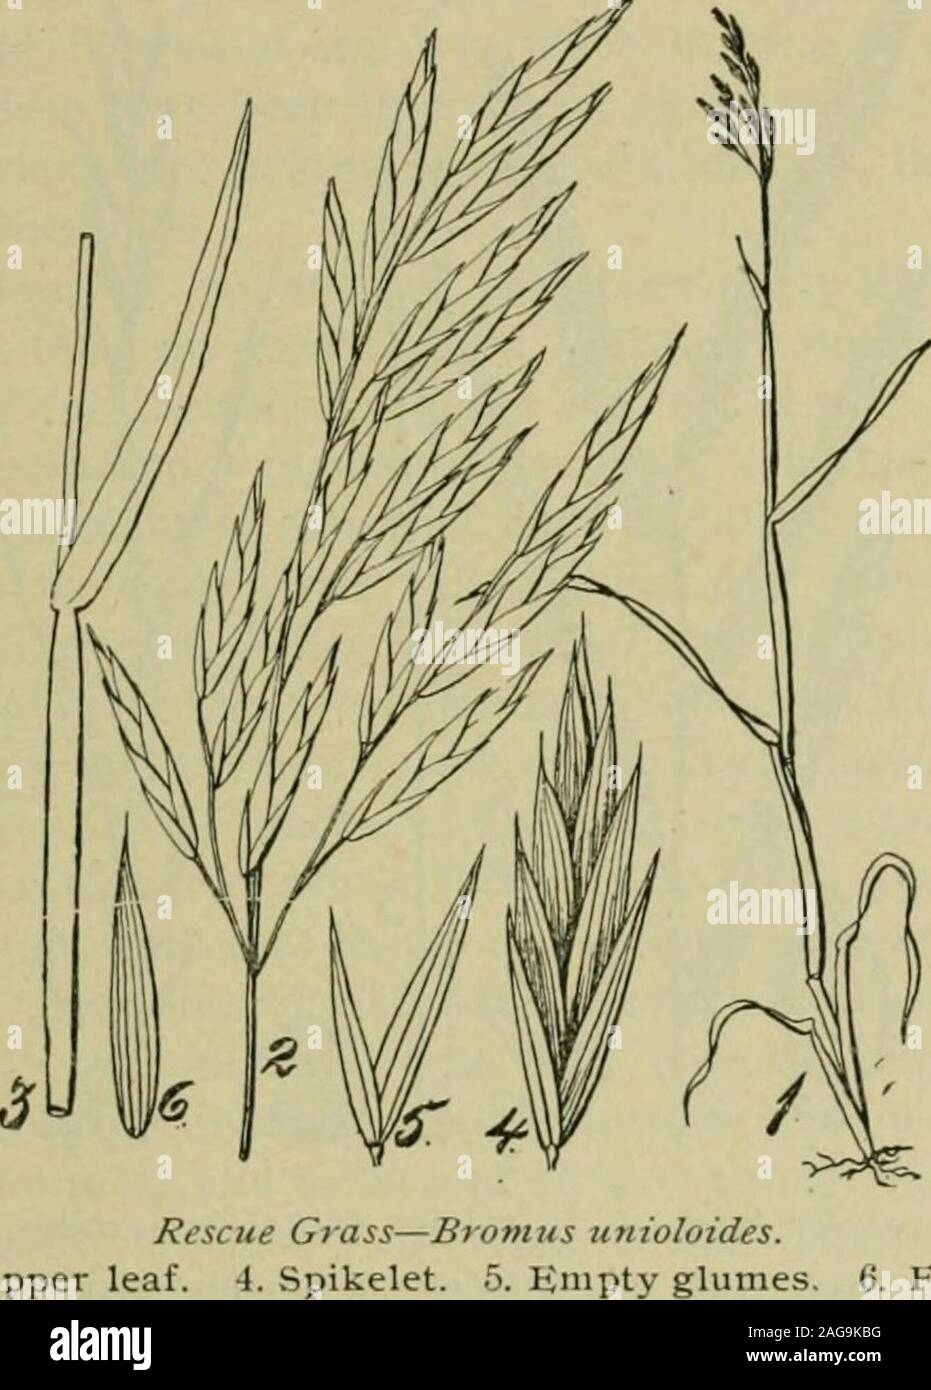 . Grasses and forage plants, by J.B. Killebrew. a simple, open panicle. B, a spikelet,two-flowered, with a sterile rudiment terminating the rachilla. C, one of the broad,lanceolate empty glumes. /), a flowering glume; this hears an awn on the back justbelow the two-toothed apex. /, pistil; the ovarv of which is very hairy. G, lodicules.i  The oat i.s a most useful forage i)lant; but fts culture and uses are well understoodand require no discus.siou here. 71 RESCUE GRASS—AUSTRALIAN OATS—{Brovius unwlotdes.)—{WinterGrazing.)This grass is a native of South America. It is an annual, but as itseeds Stock Photo